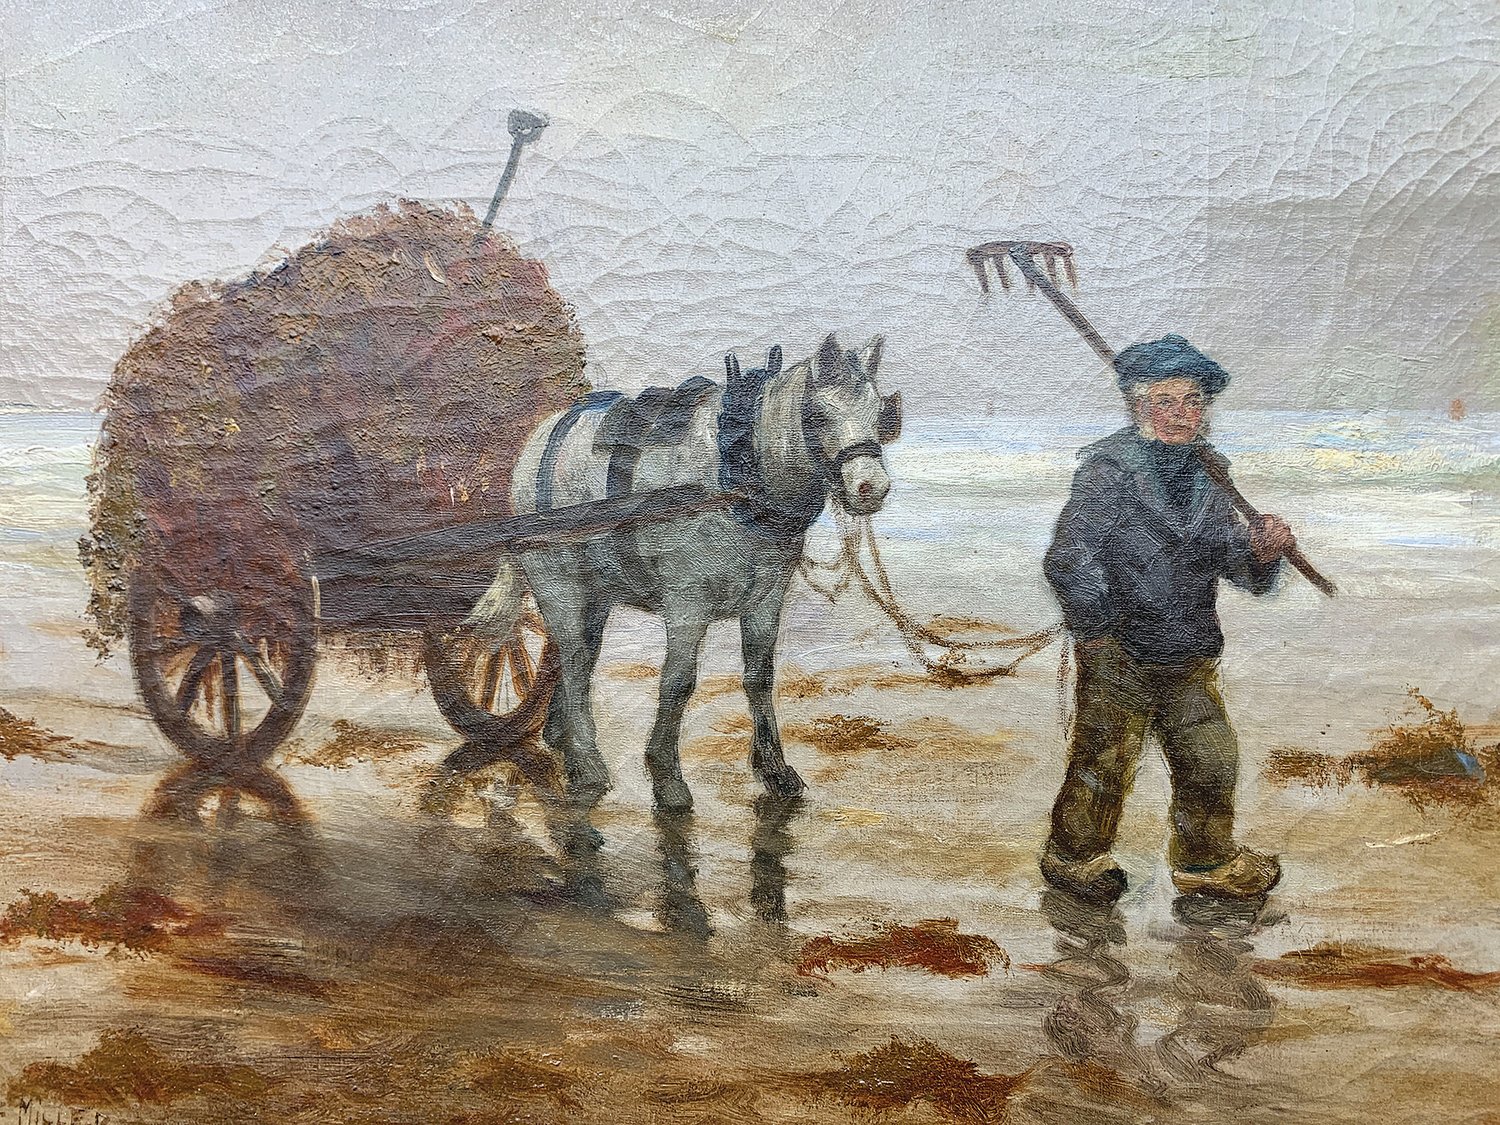 This 1896 oil painting of a kelp gatherer would have been a familiar sight to Oscar Miller during his time in Concarneau, a commune in the northwestern French department of Brittany. Local farmers would collect the seaweed for use as fertilizer in their fields.